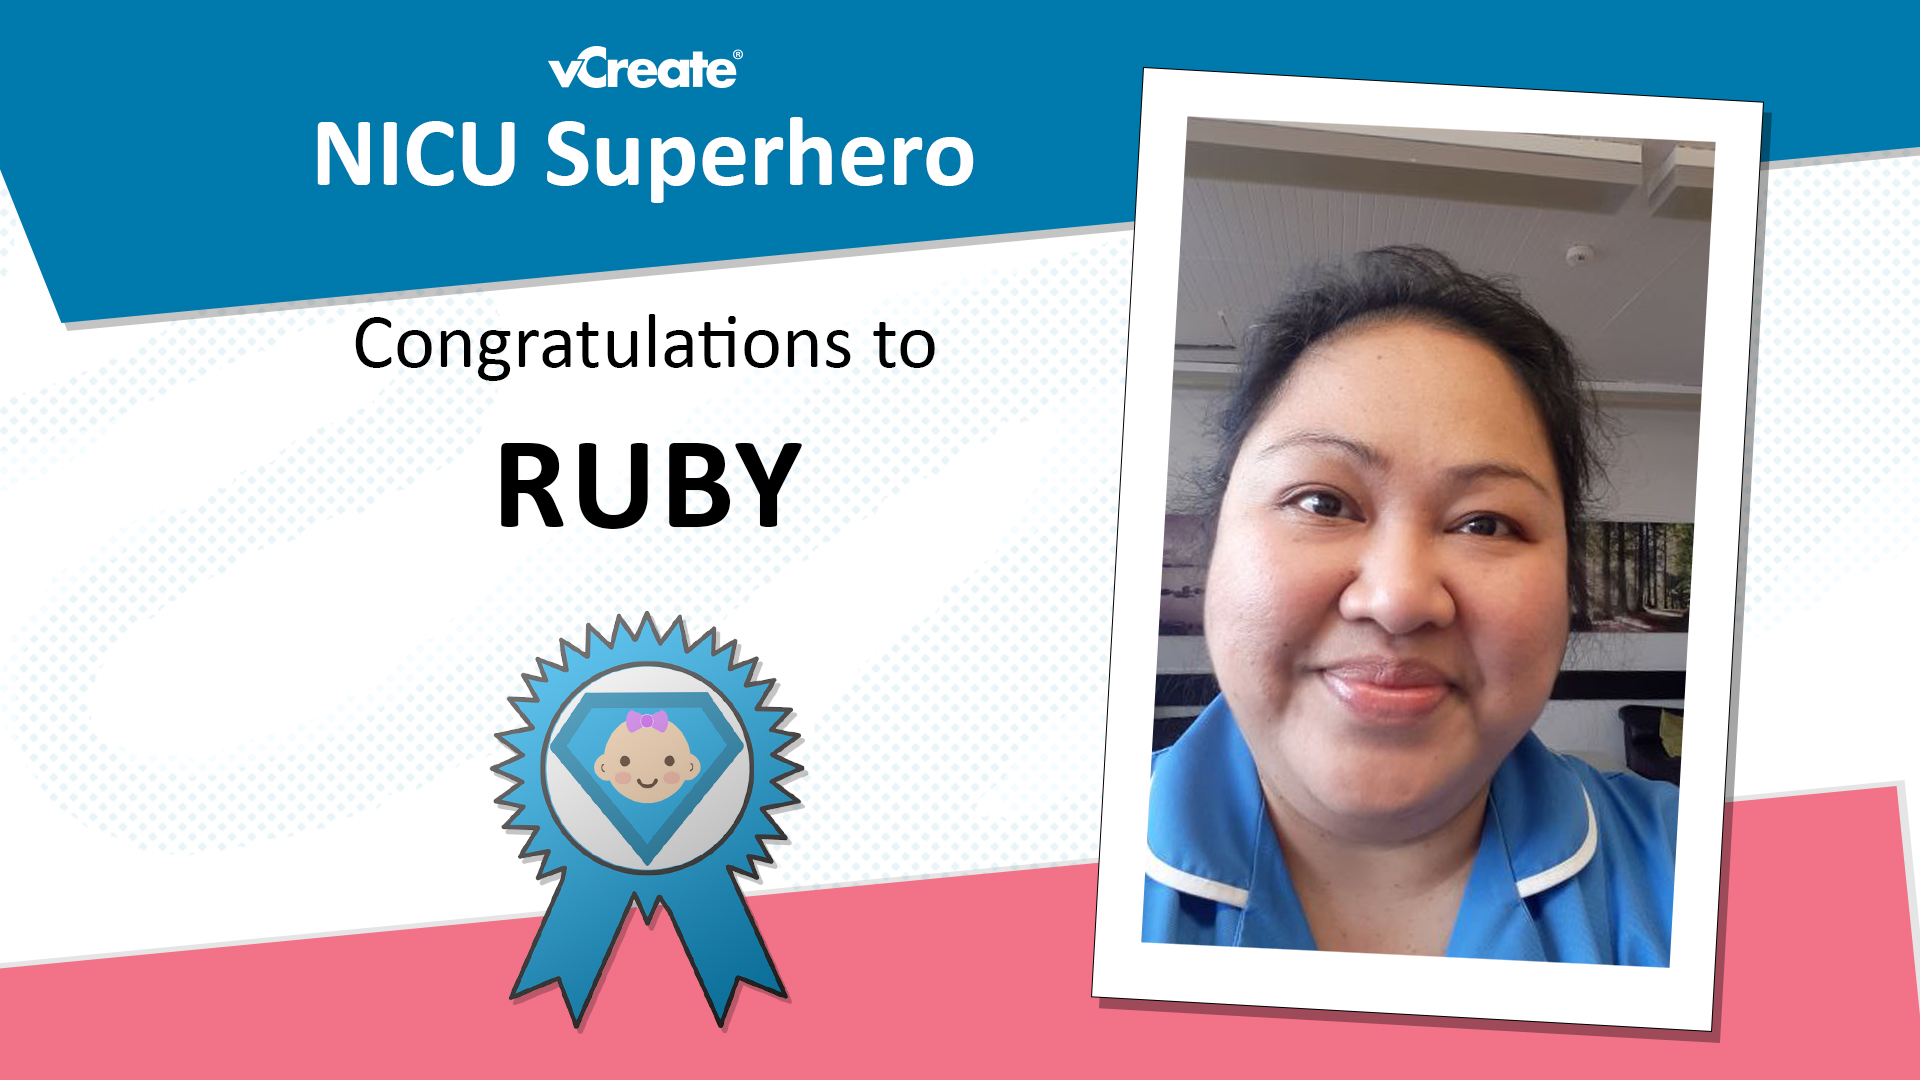 Ruby from St James's University Hospital in Leeds is Nicola and Liam's NICU Superhero!